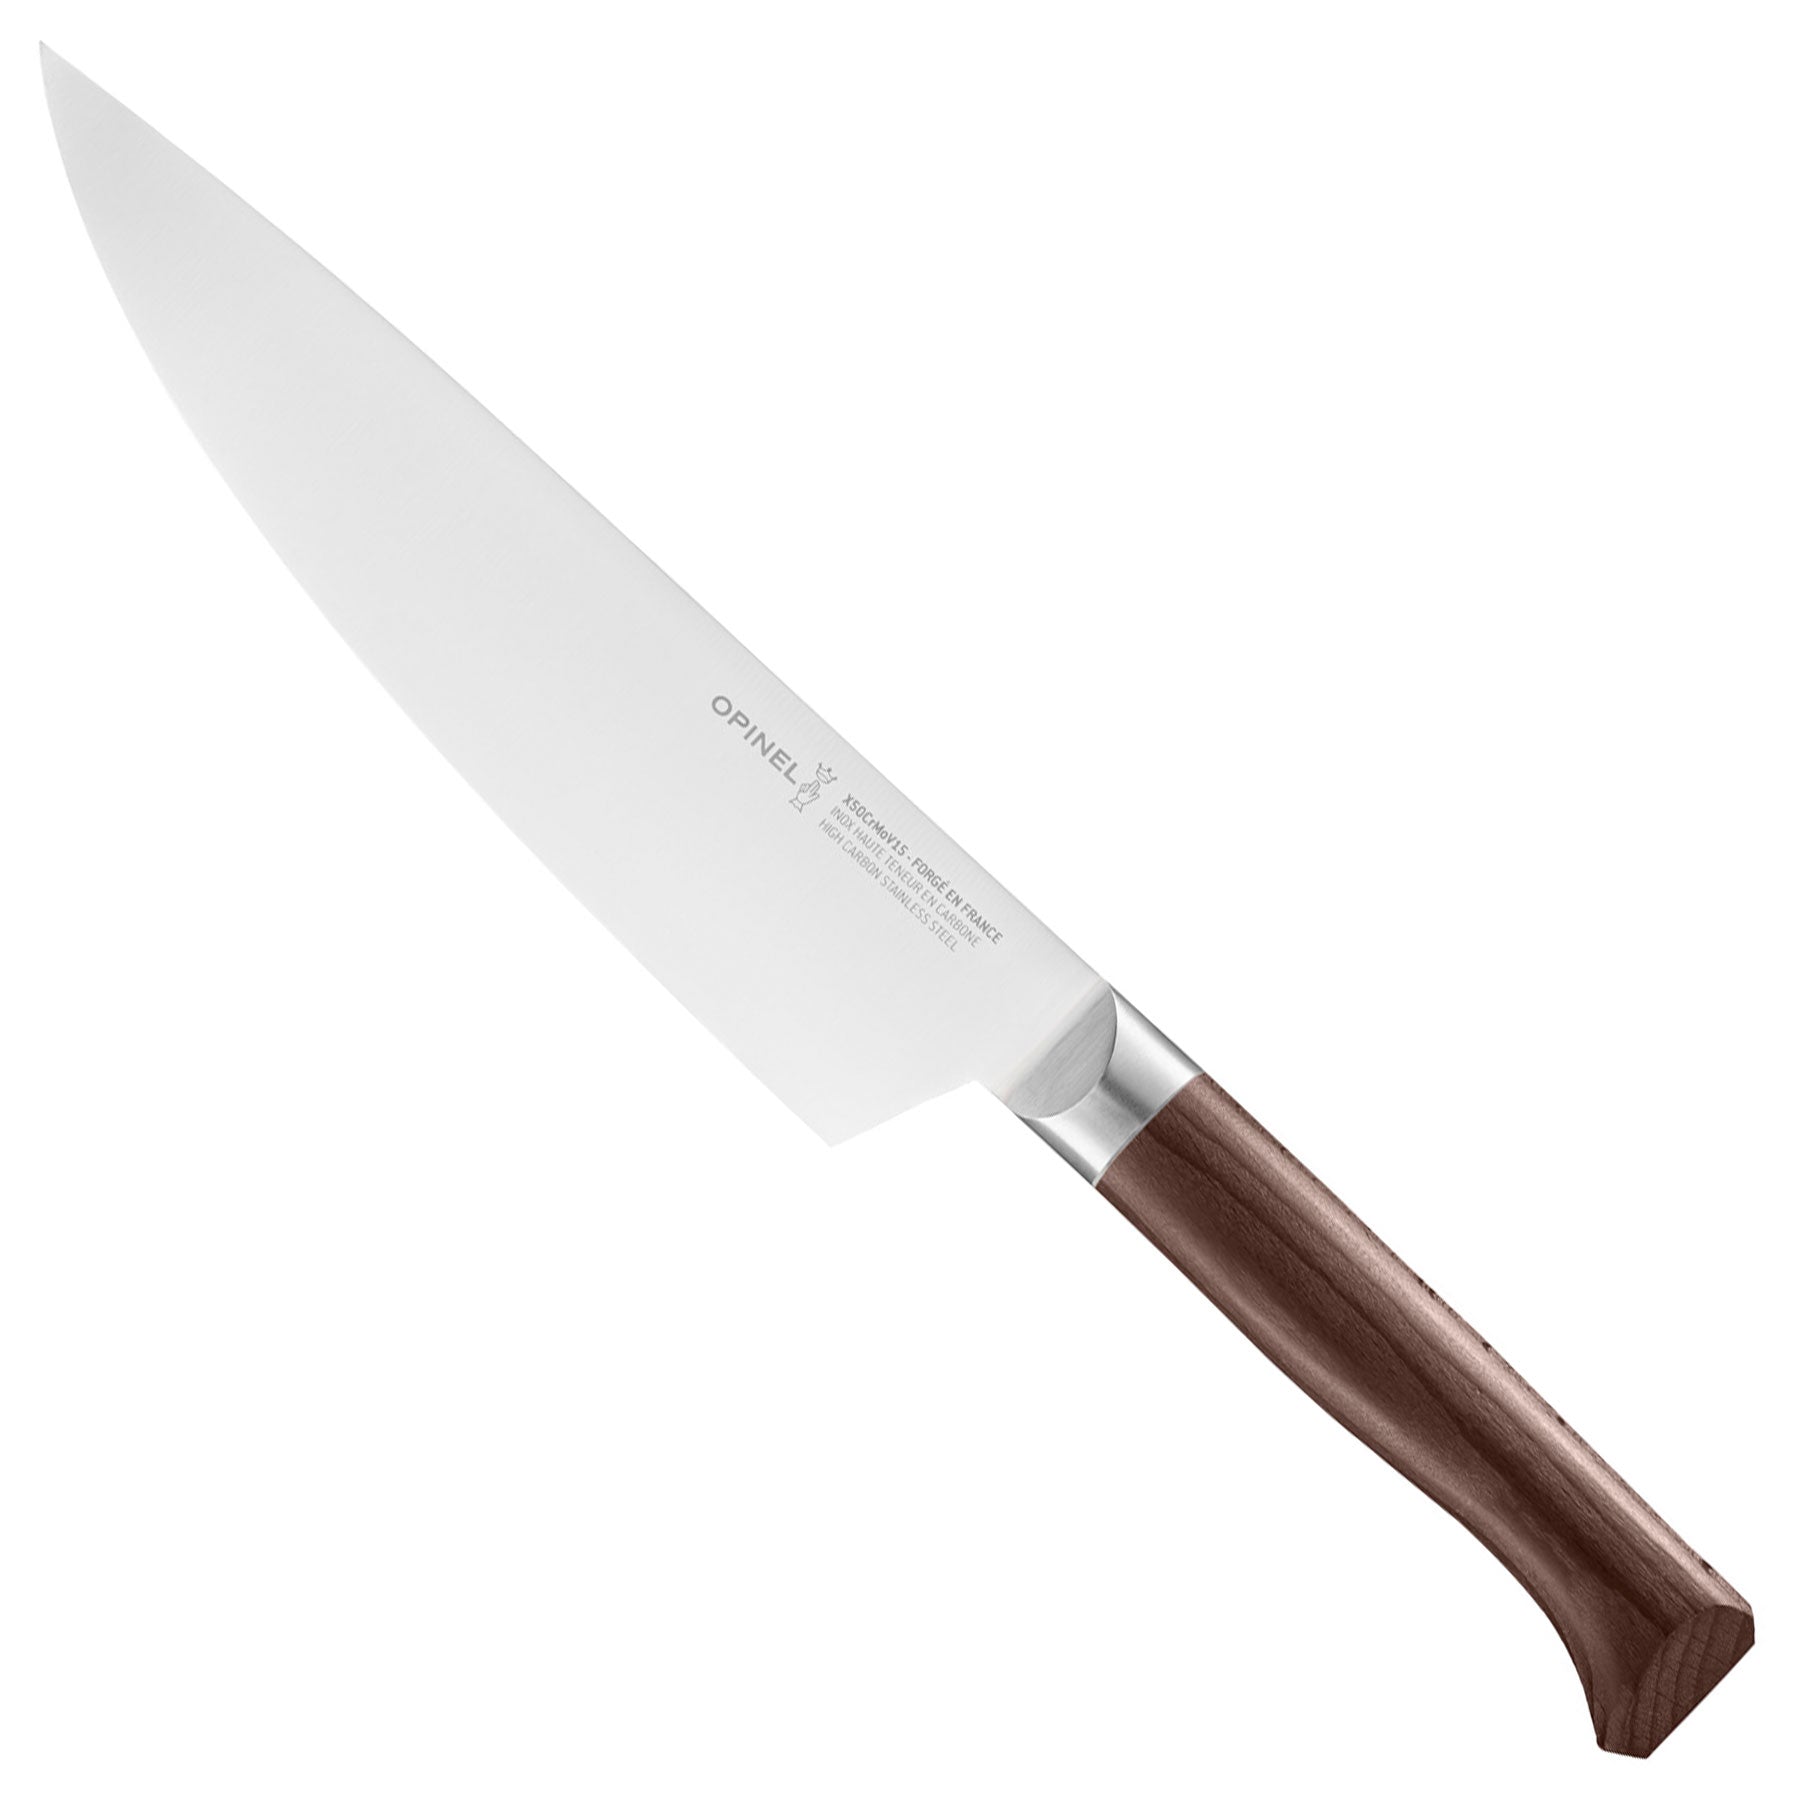 Les Forgés 1890 8 Chef Knife - OPINEL USA